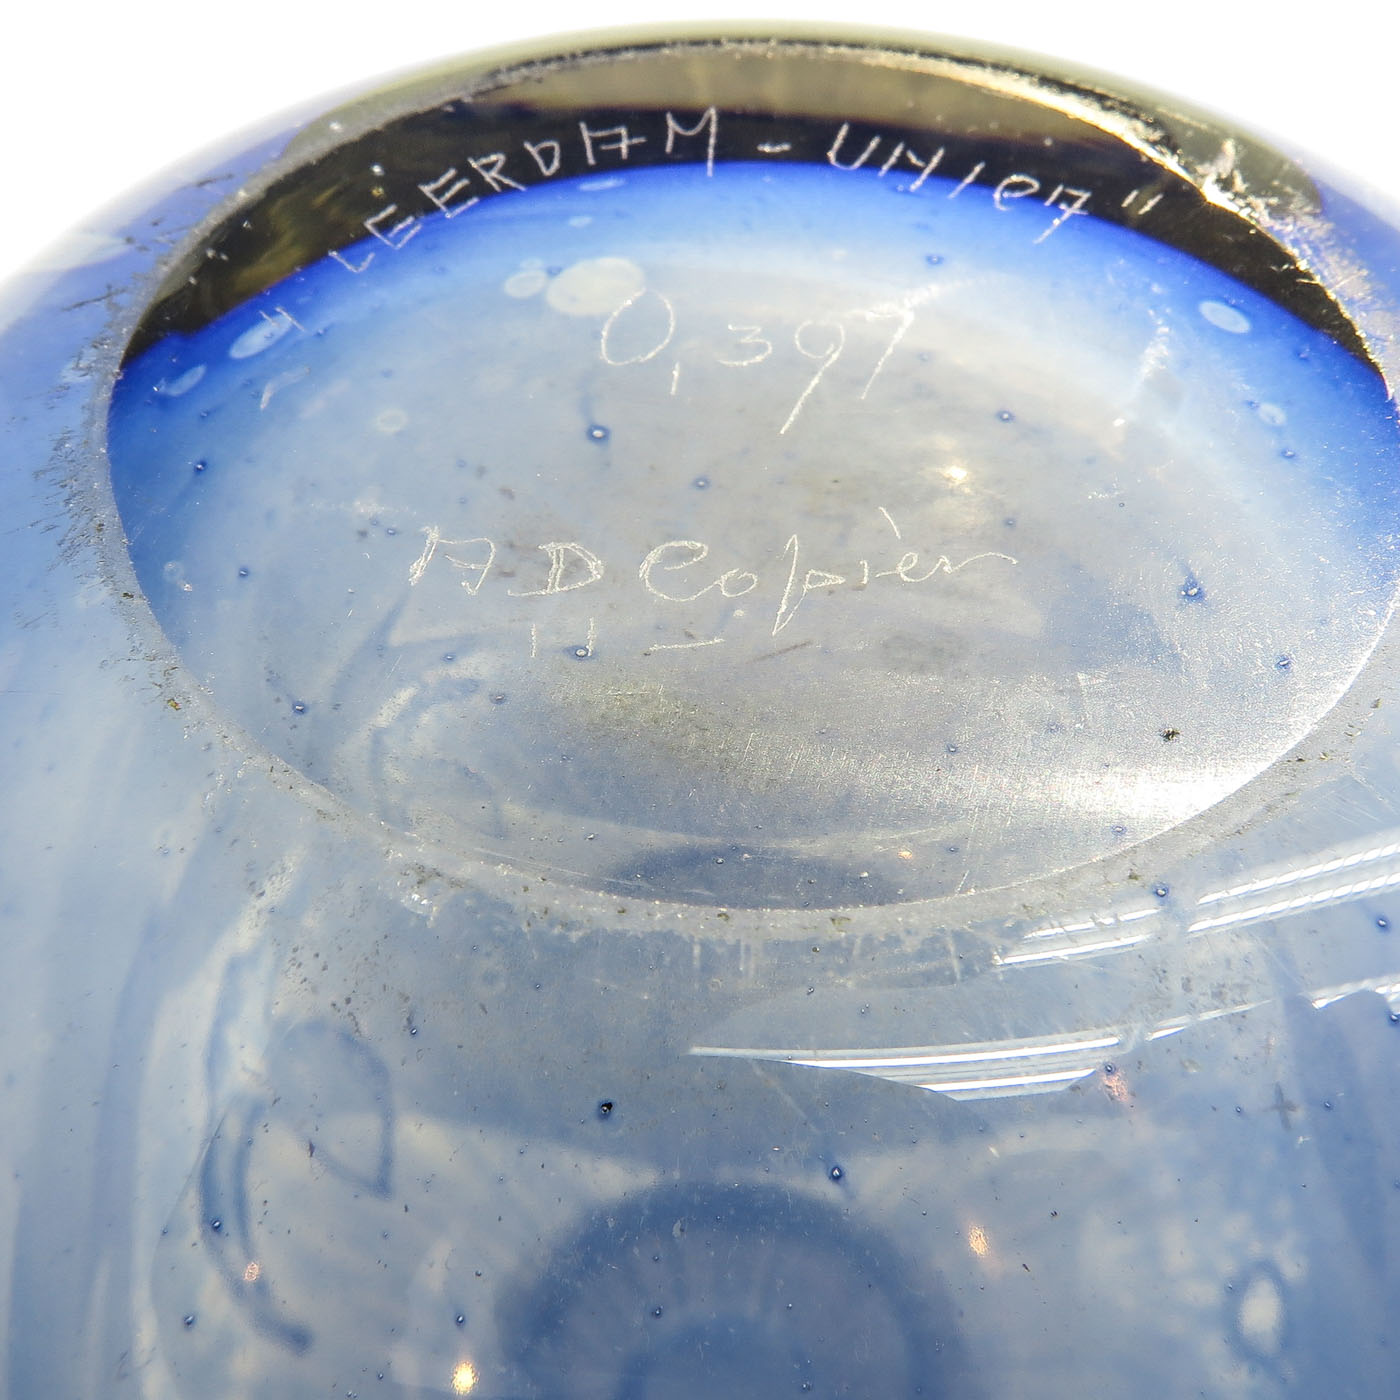 A Signed and Numbered Copier Vase - Image 7 of 8